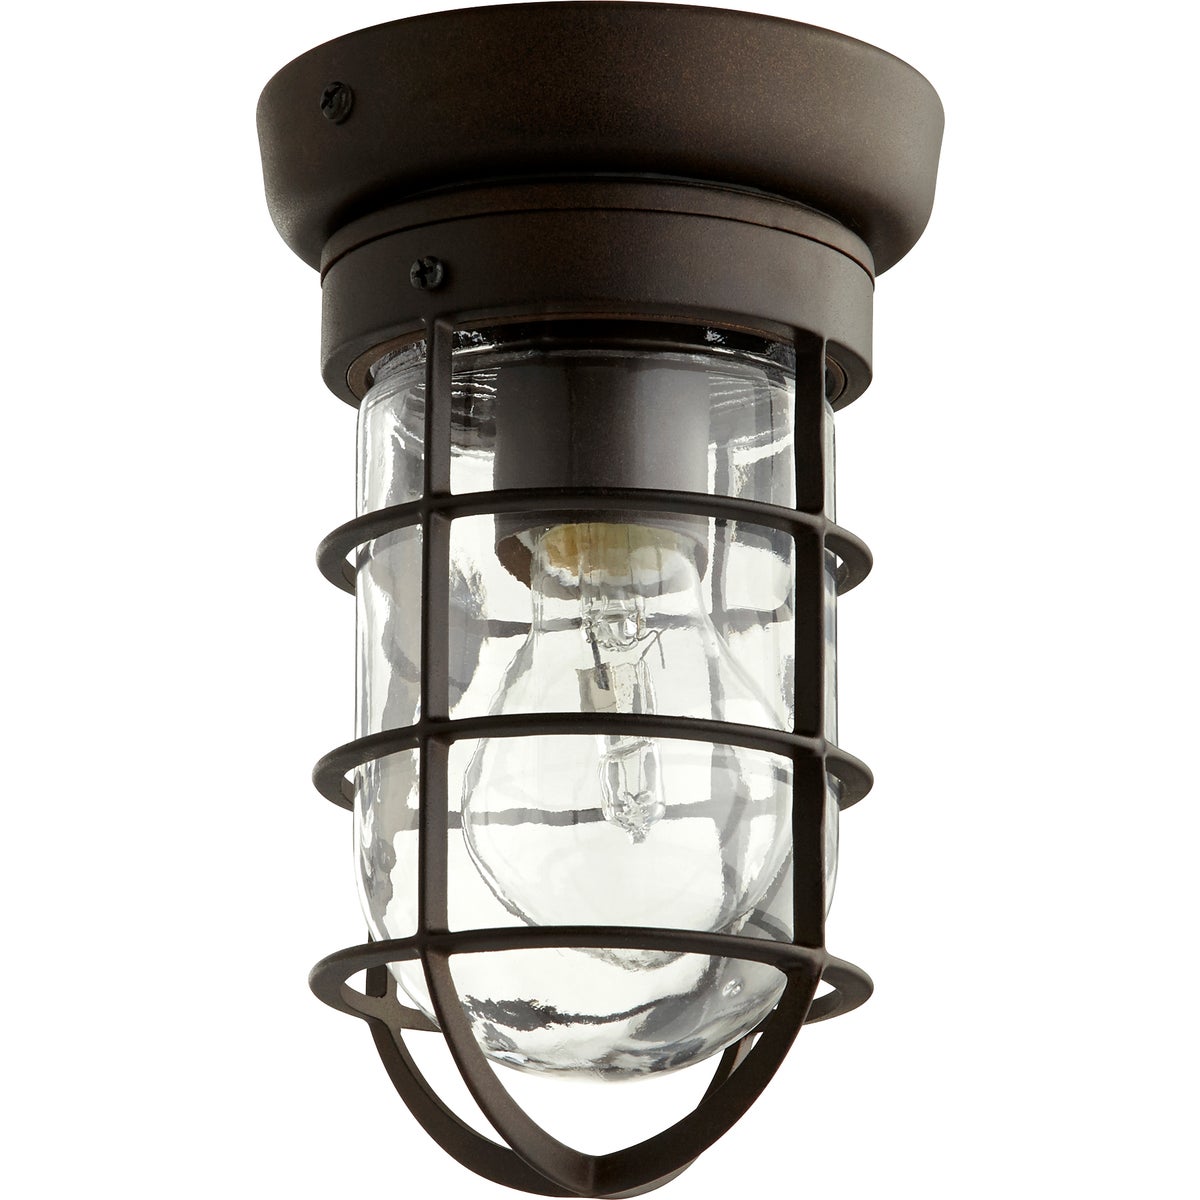 Coastal Outdoor Ceiling Light with clear glass shade and cage enclosure, perfect for coastal and rustic outdoor settings. Provides eye-catching illumination for porch, deck, or balcony. 60W, 1-bulb fixture with medium E26 base. UL Listed for wet locations. 2-year warranty.